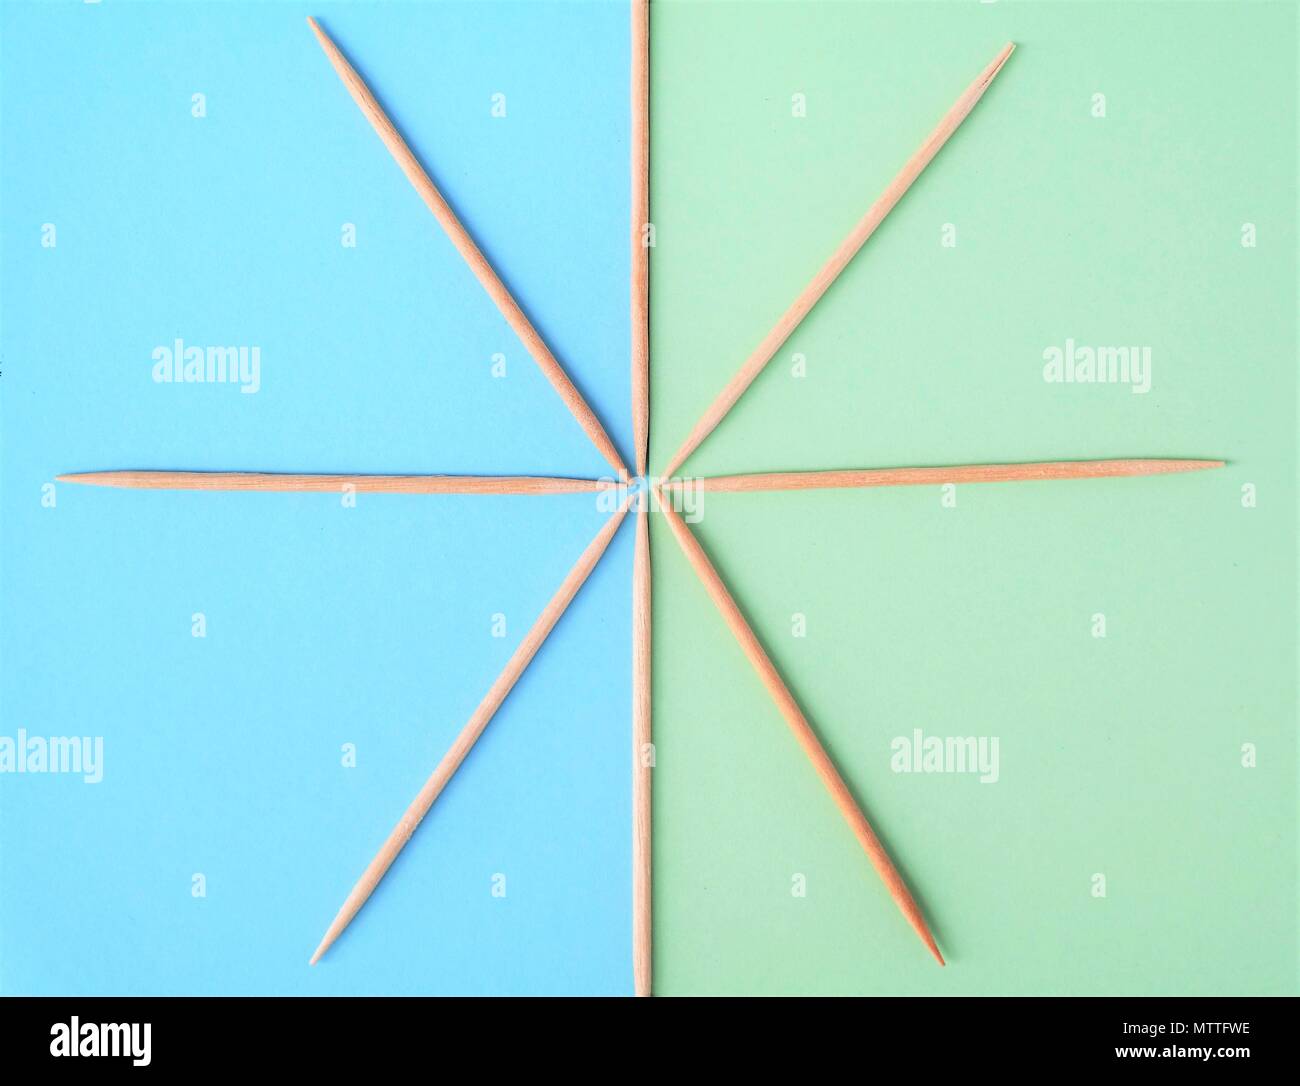 minimalism image with a shape of a star and two pastel colors: blue and green. creative concept with small wooden sticks.  top view and text space. Stock Photo